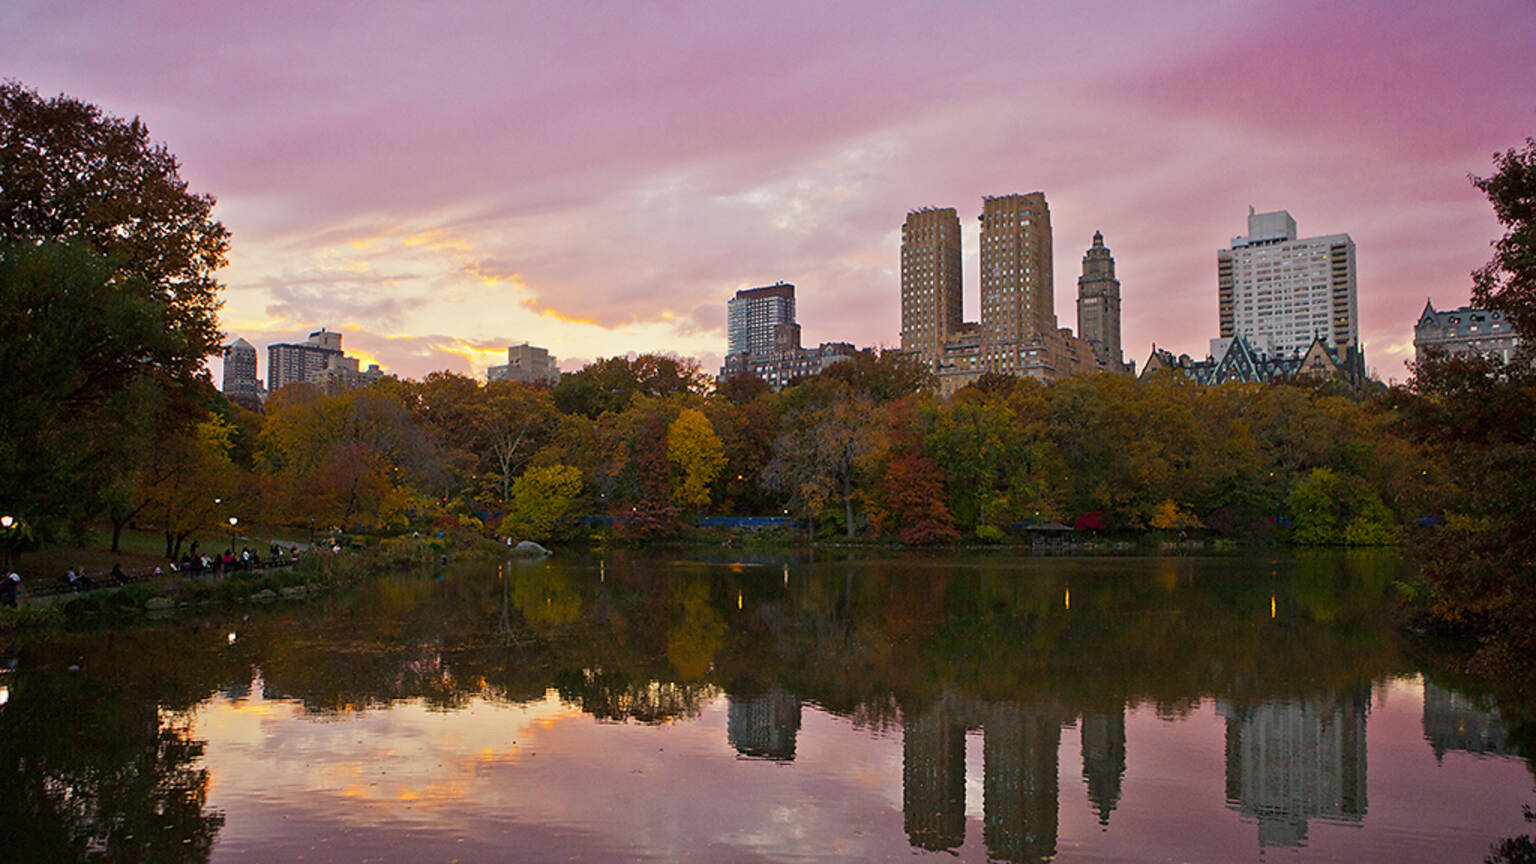 See a sunset NYC tourists will rave about with our pick of stunning photos